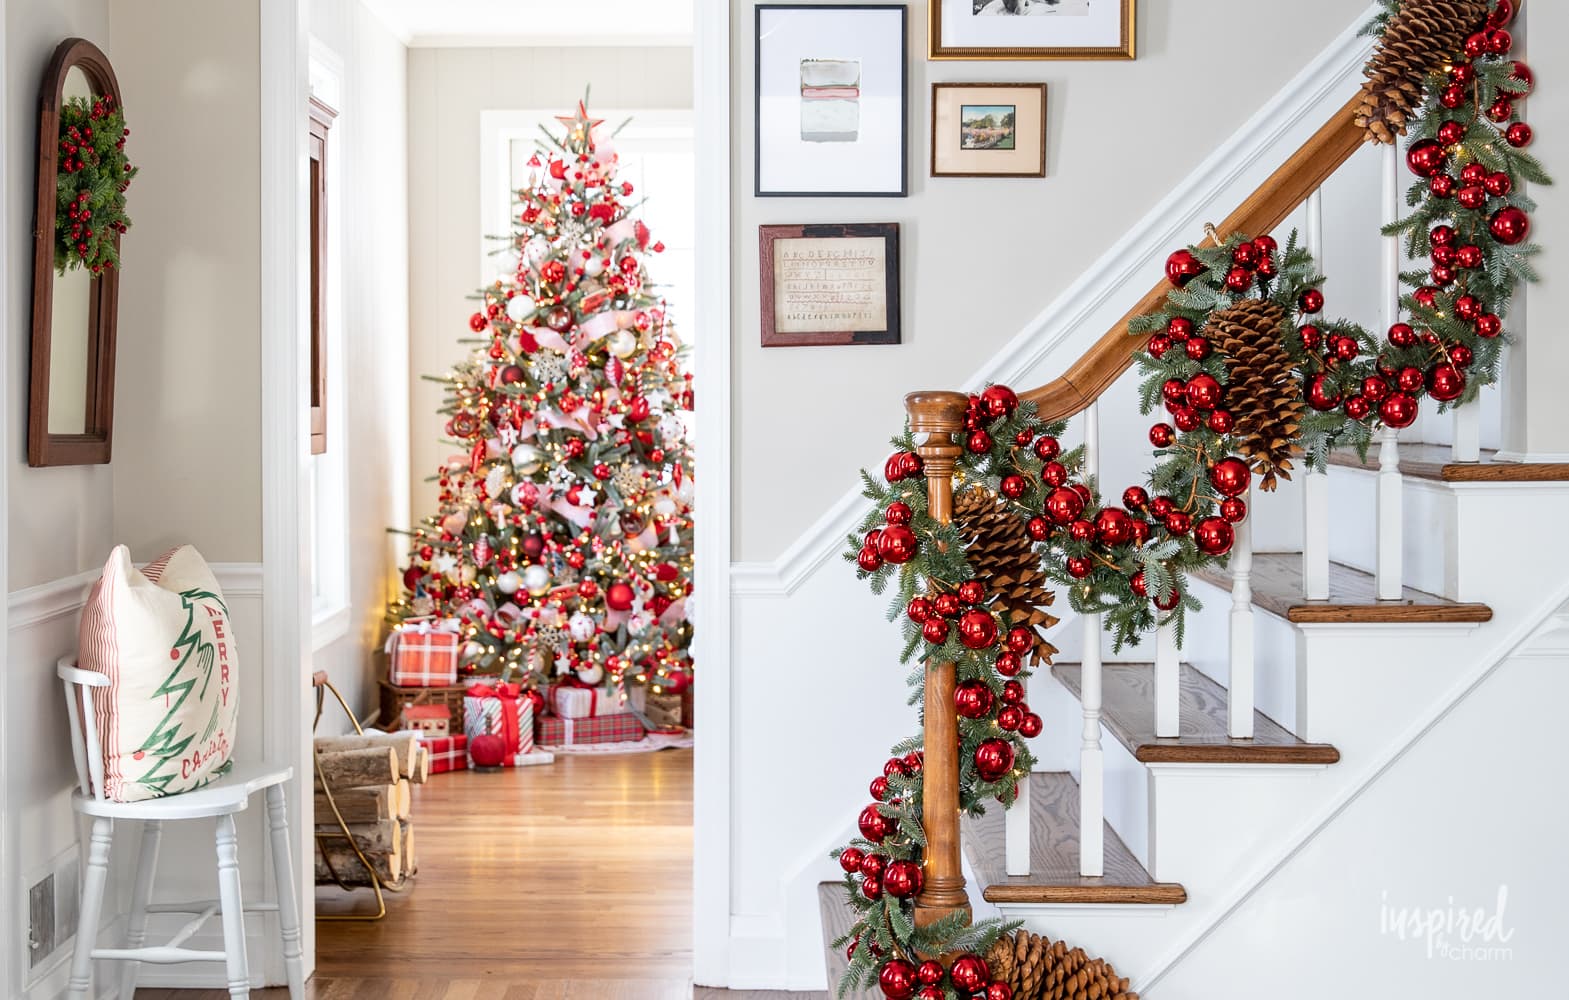 Decorating a Foyer for Christmas